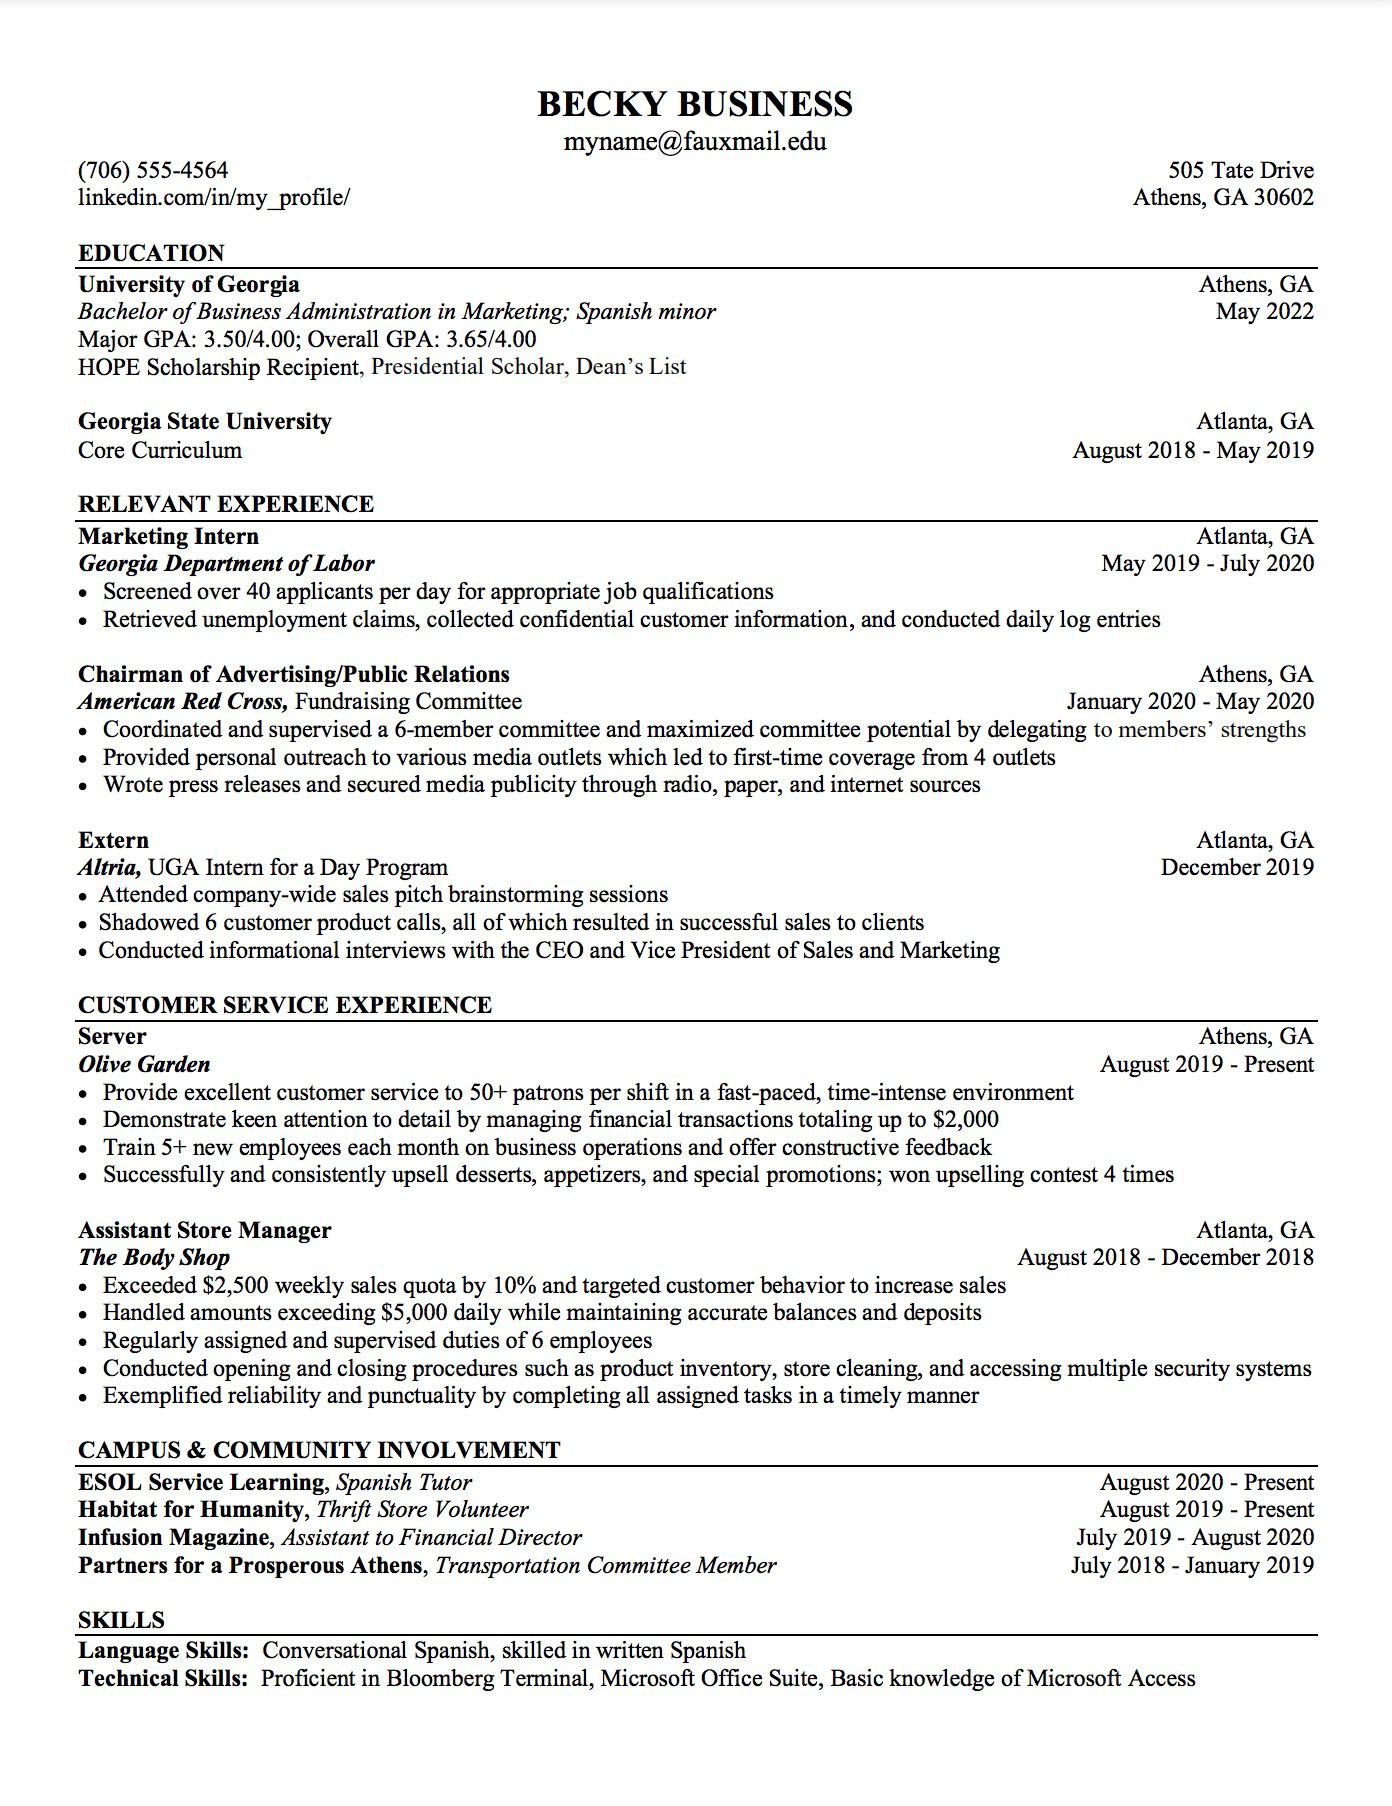 Business resume template